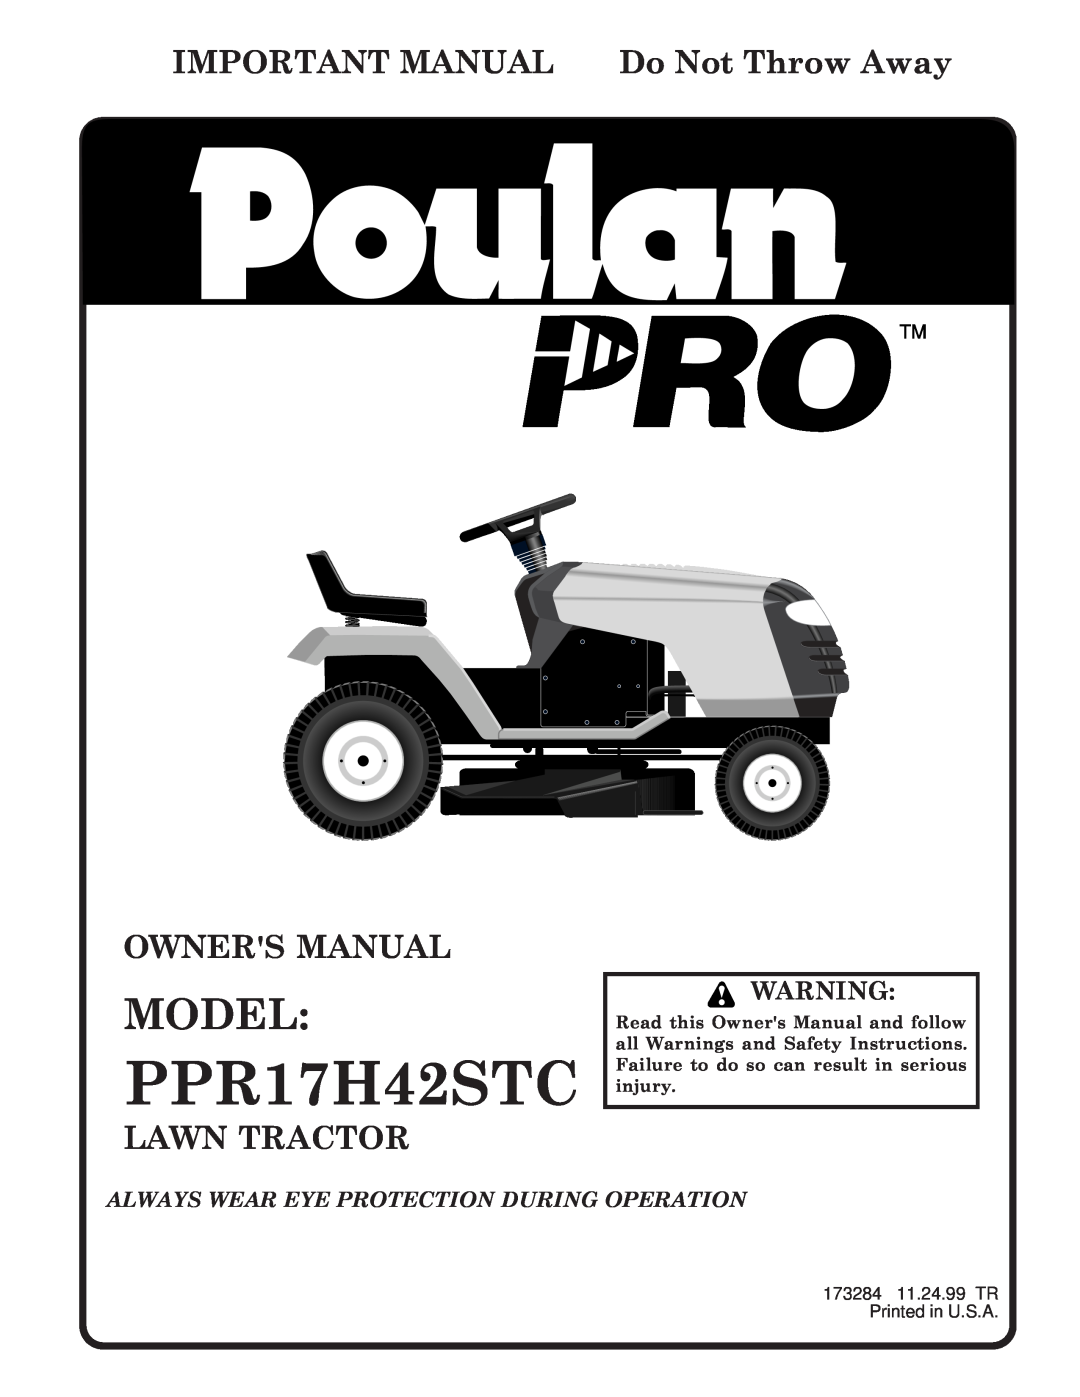 Poulan 173284 owner manual Model, PPR17H42STC, IMPORTANT MANUAL Do Not Throw Away, Lawn Tractor 